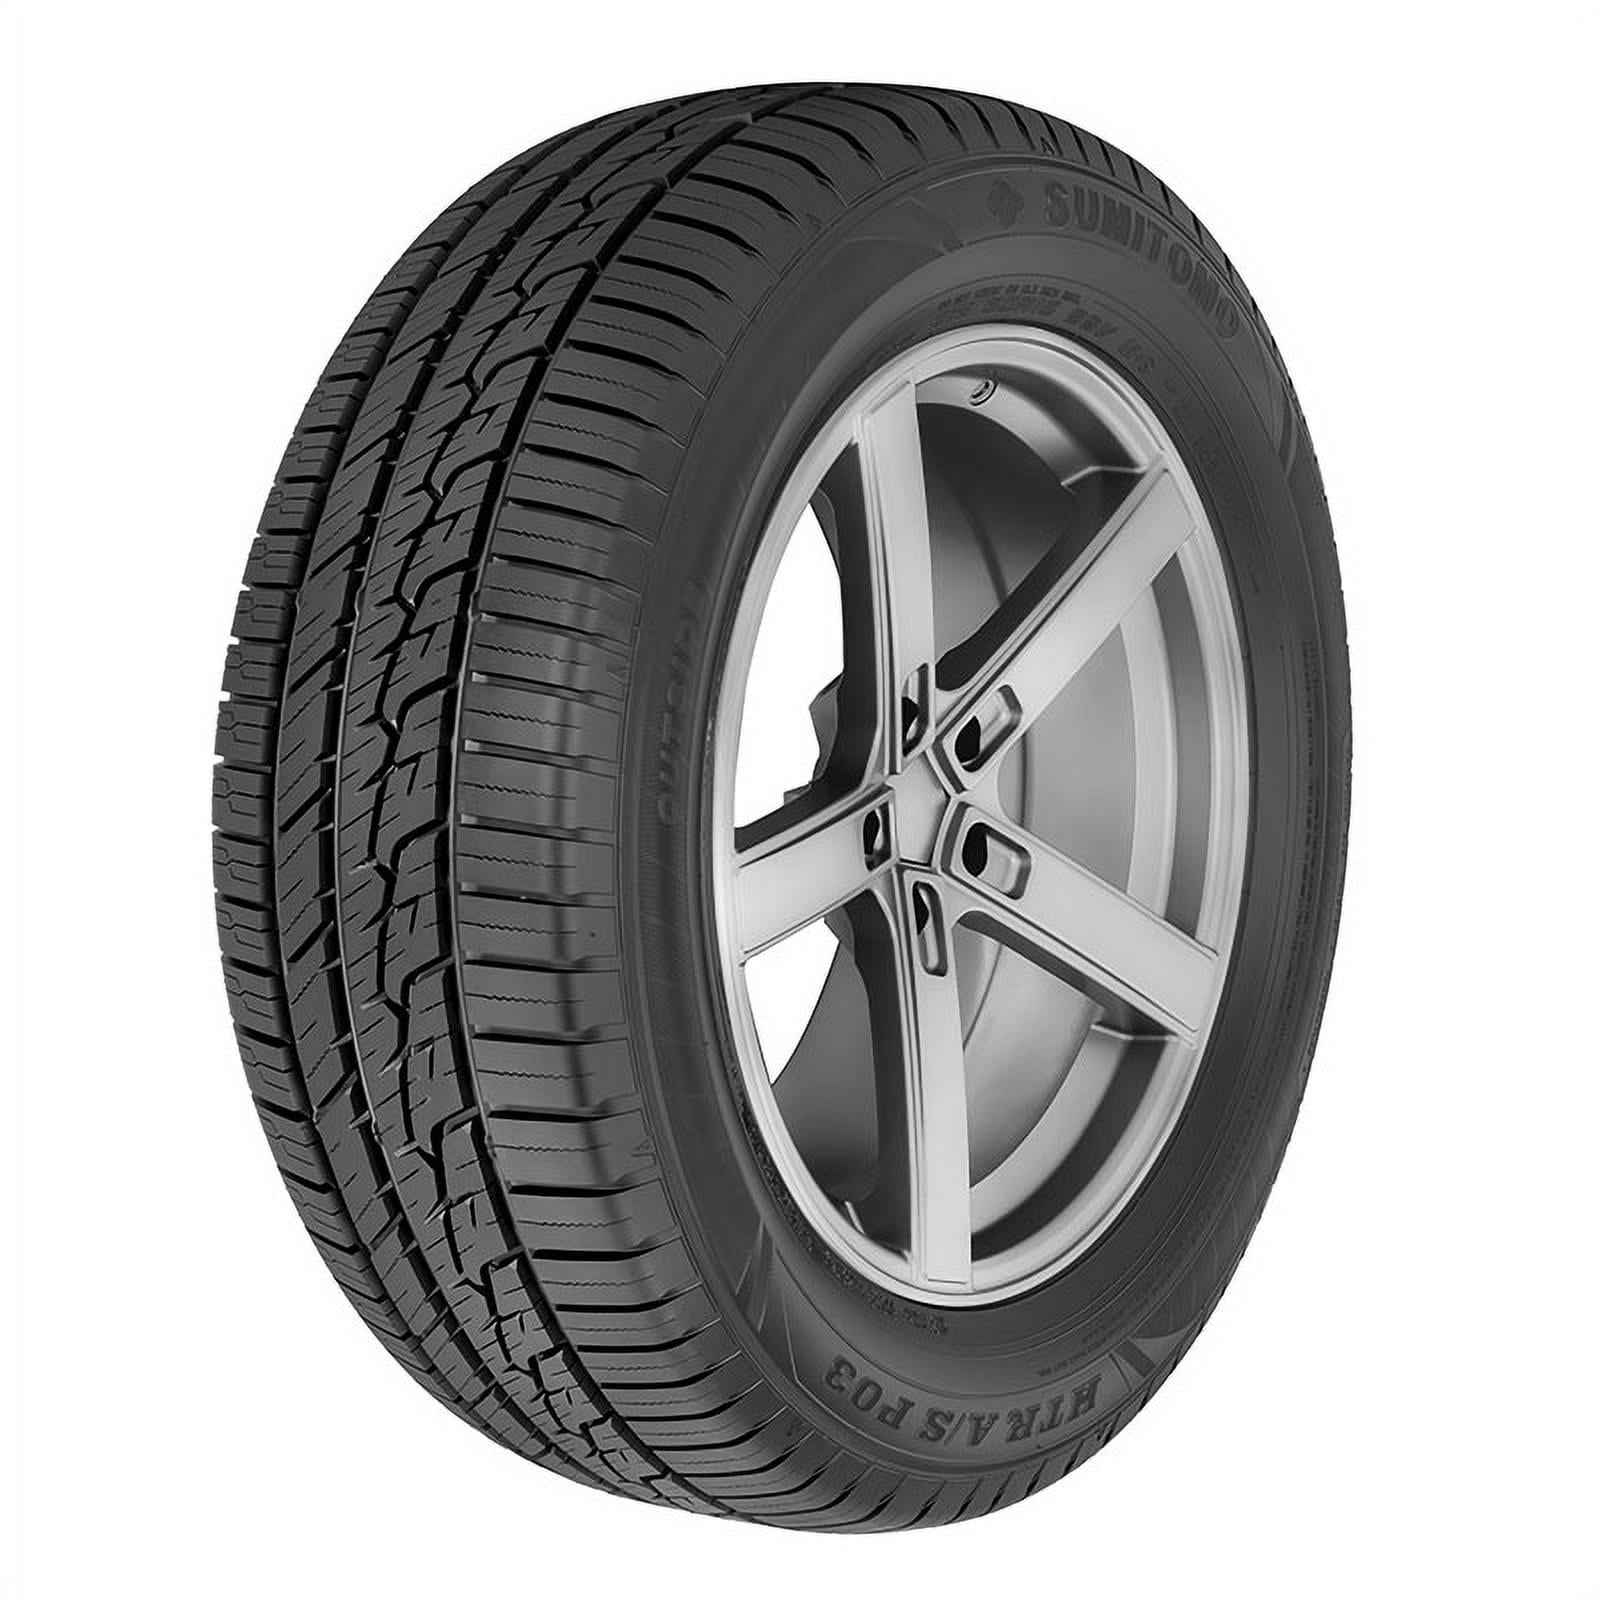 Sumitomo Tire HTR A/S P02 Performance Radial Tire 235/65R18 106H